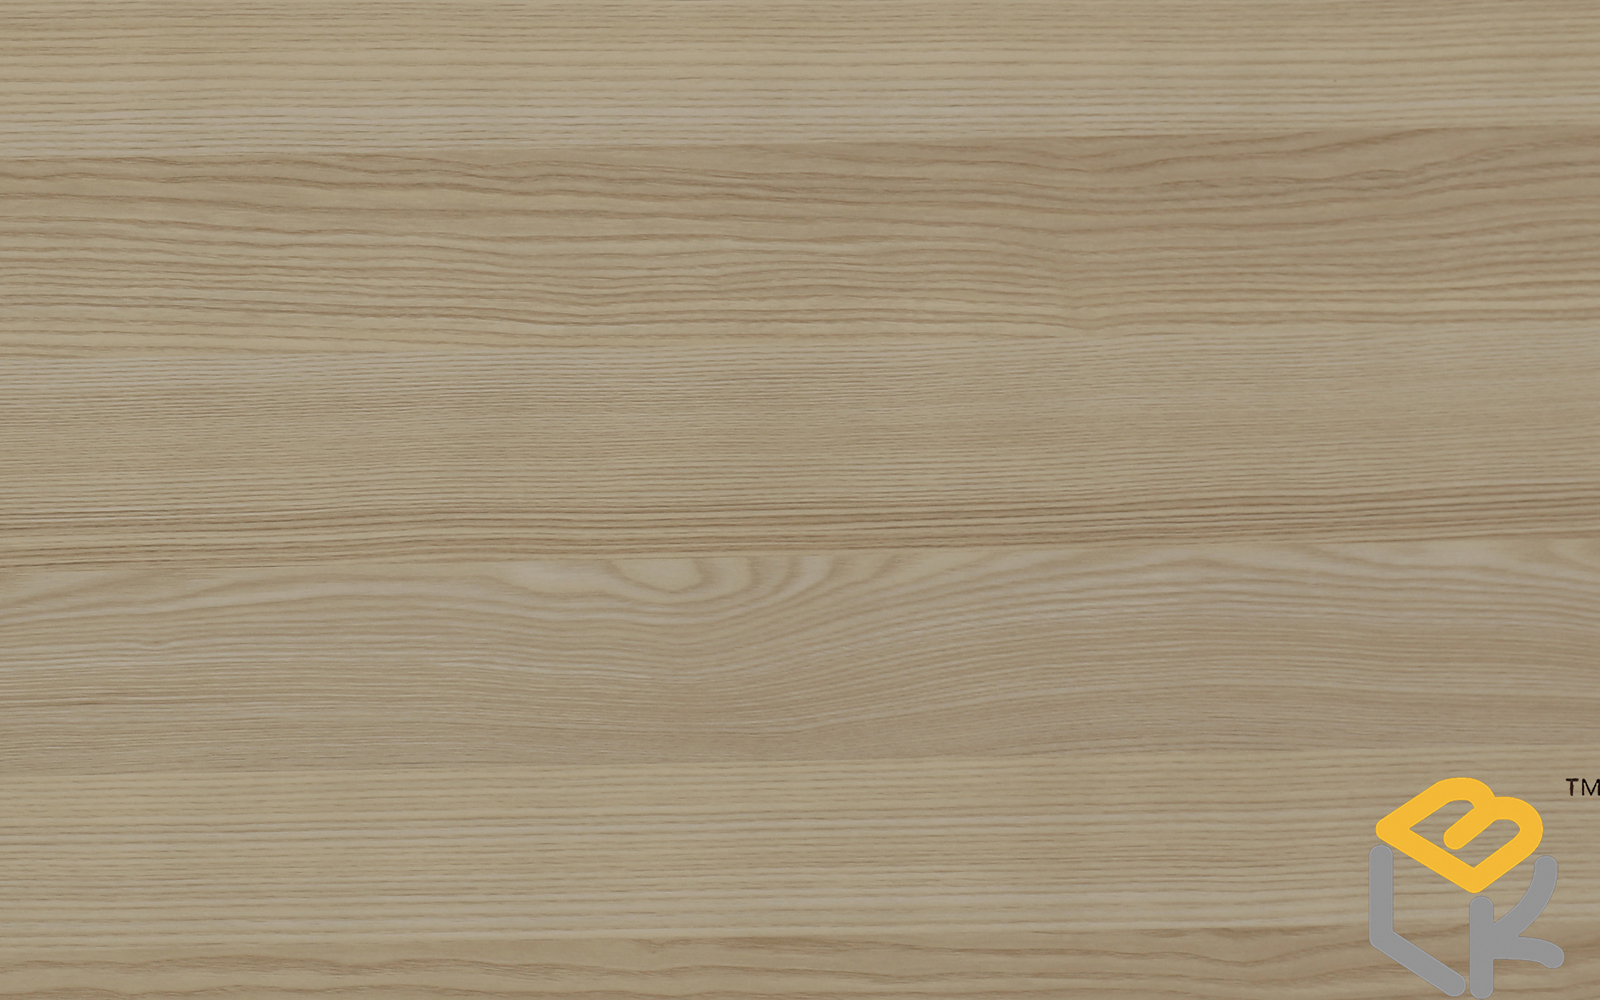 Melamine surface plywood from BLK Decor